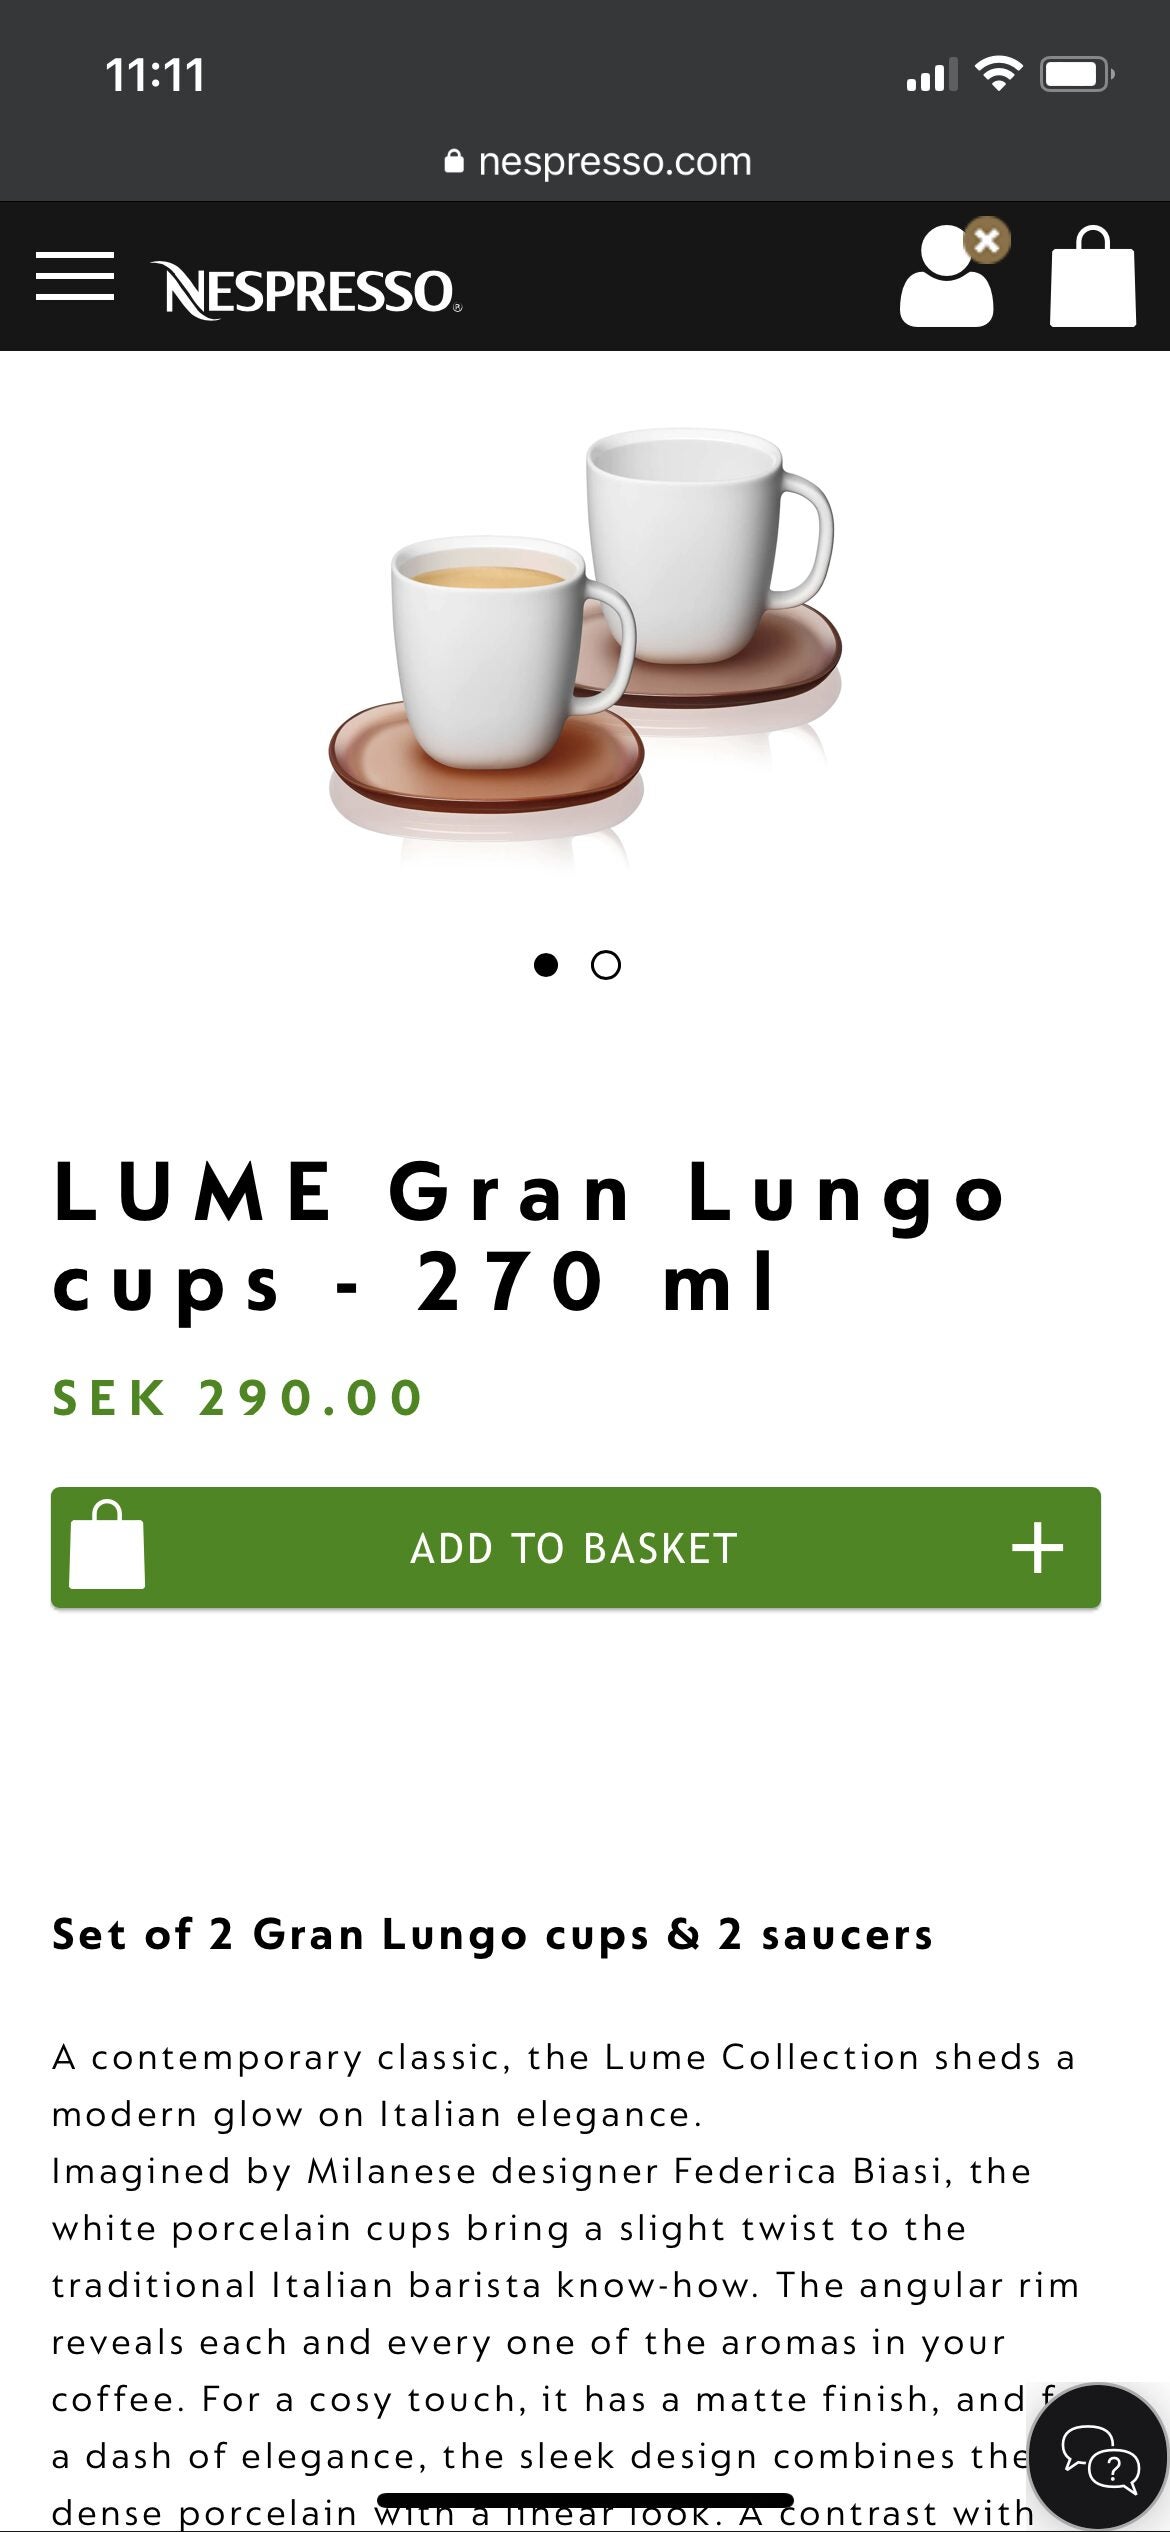 I haven't seen much about the limited edition lungo cups. I picked